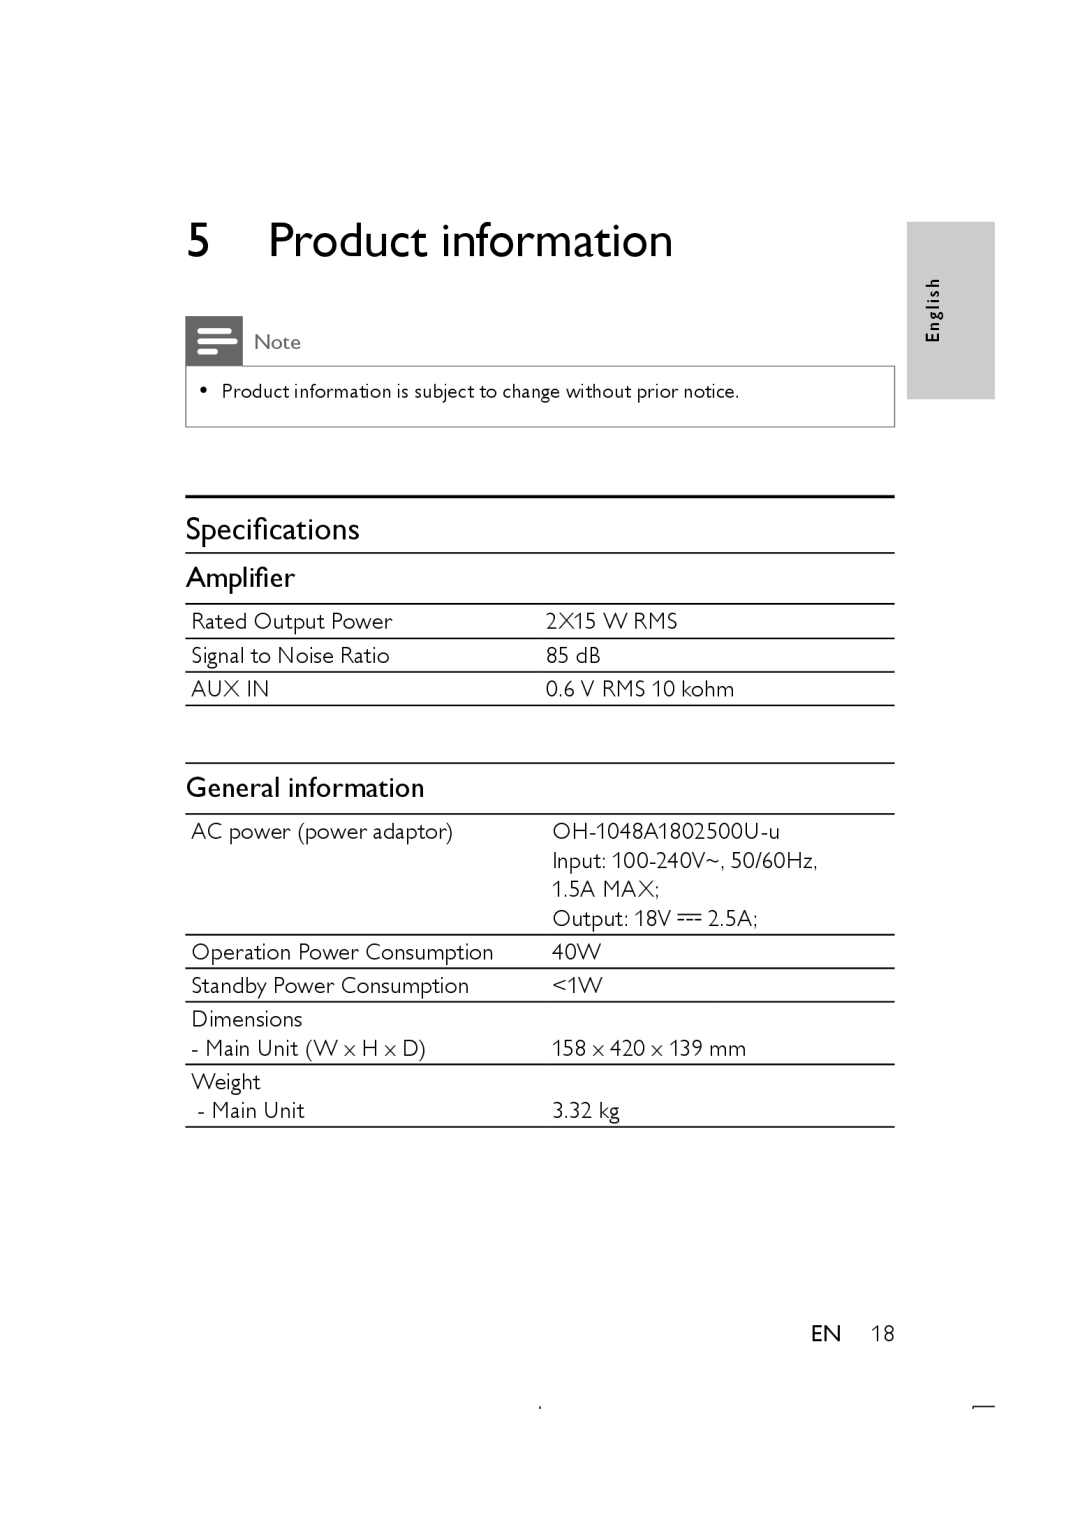 Philips DS8500 user manual Product information, Specifications, Amplifier, General information 